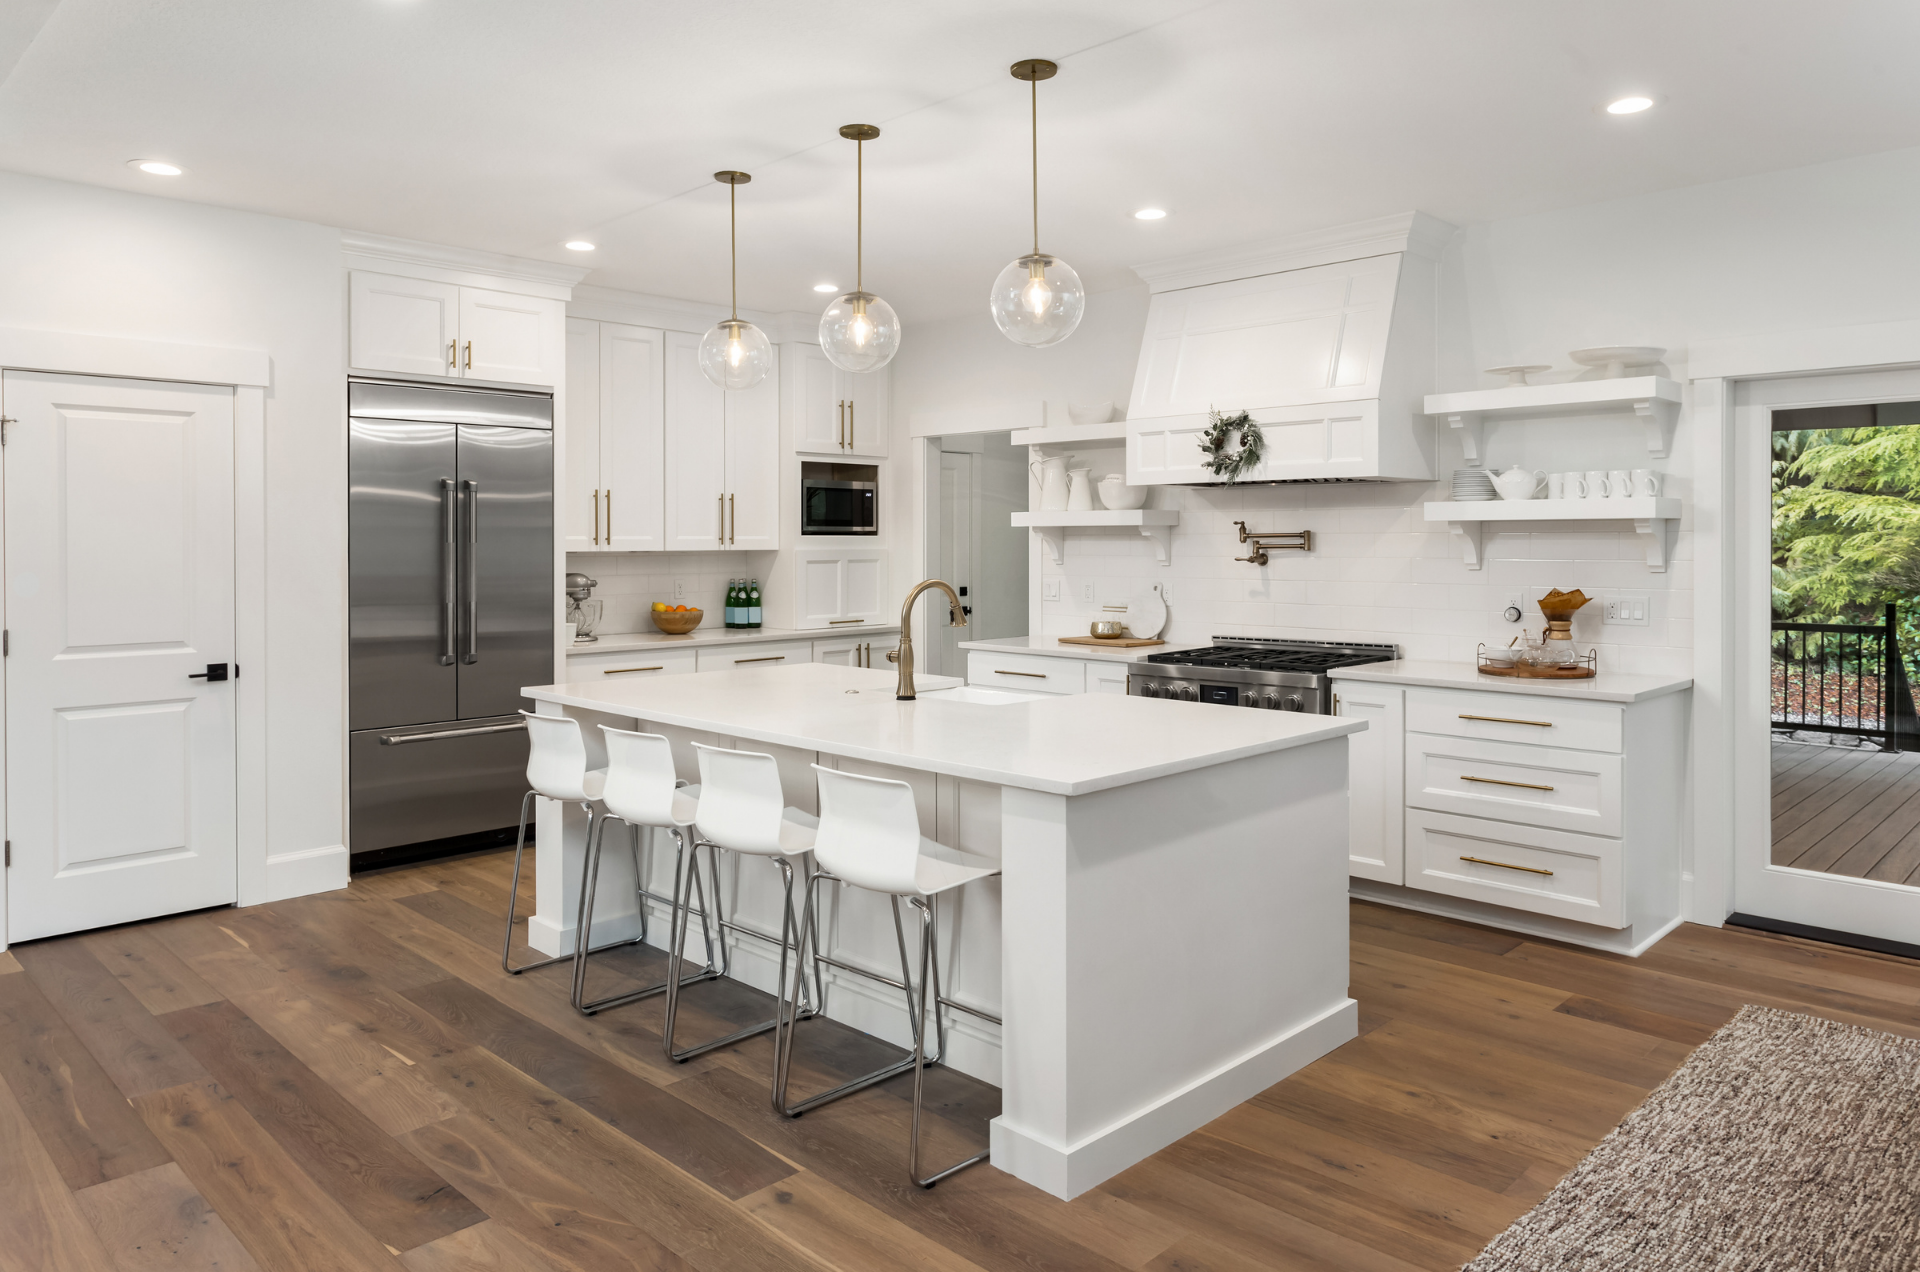 TMDC group Kitchen Remodel with white subway tiles hardwood flooring and pot filler